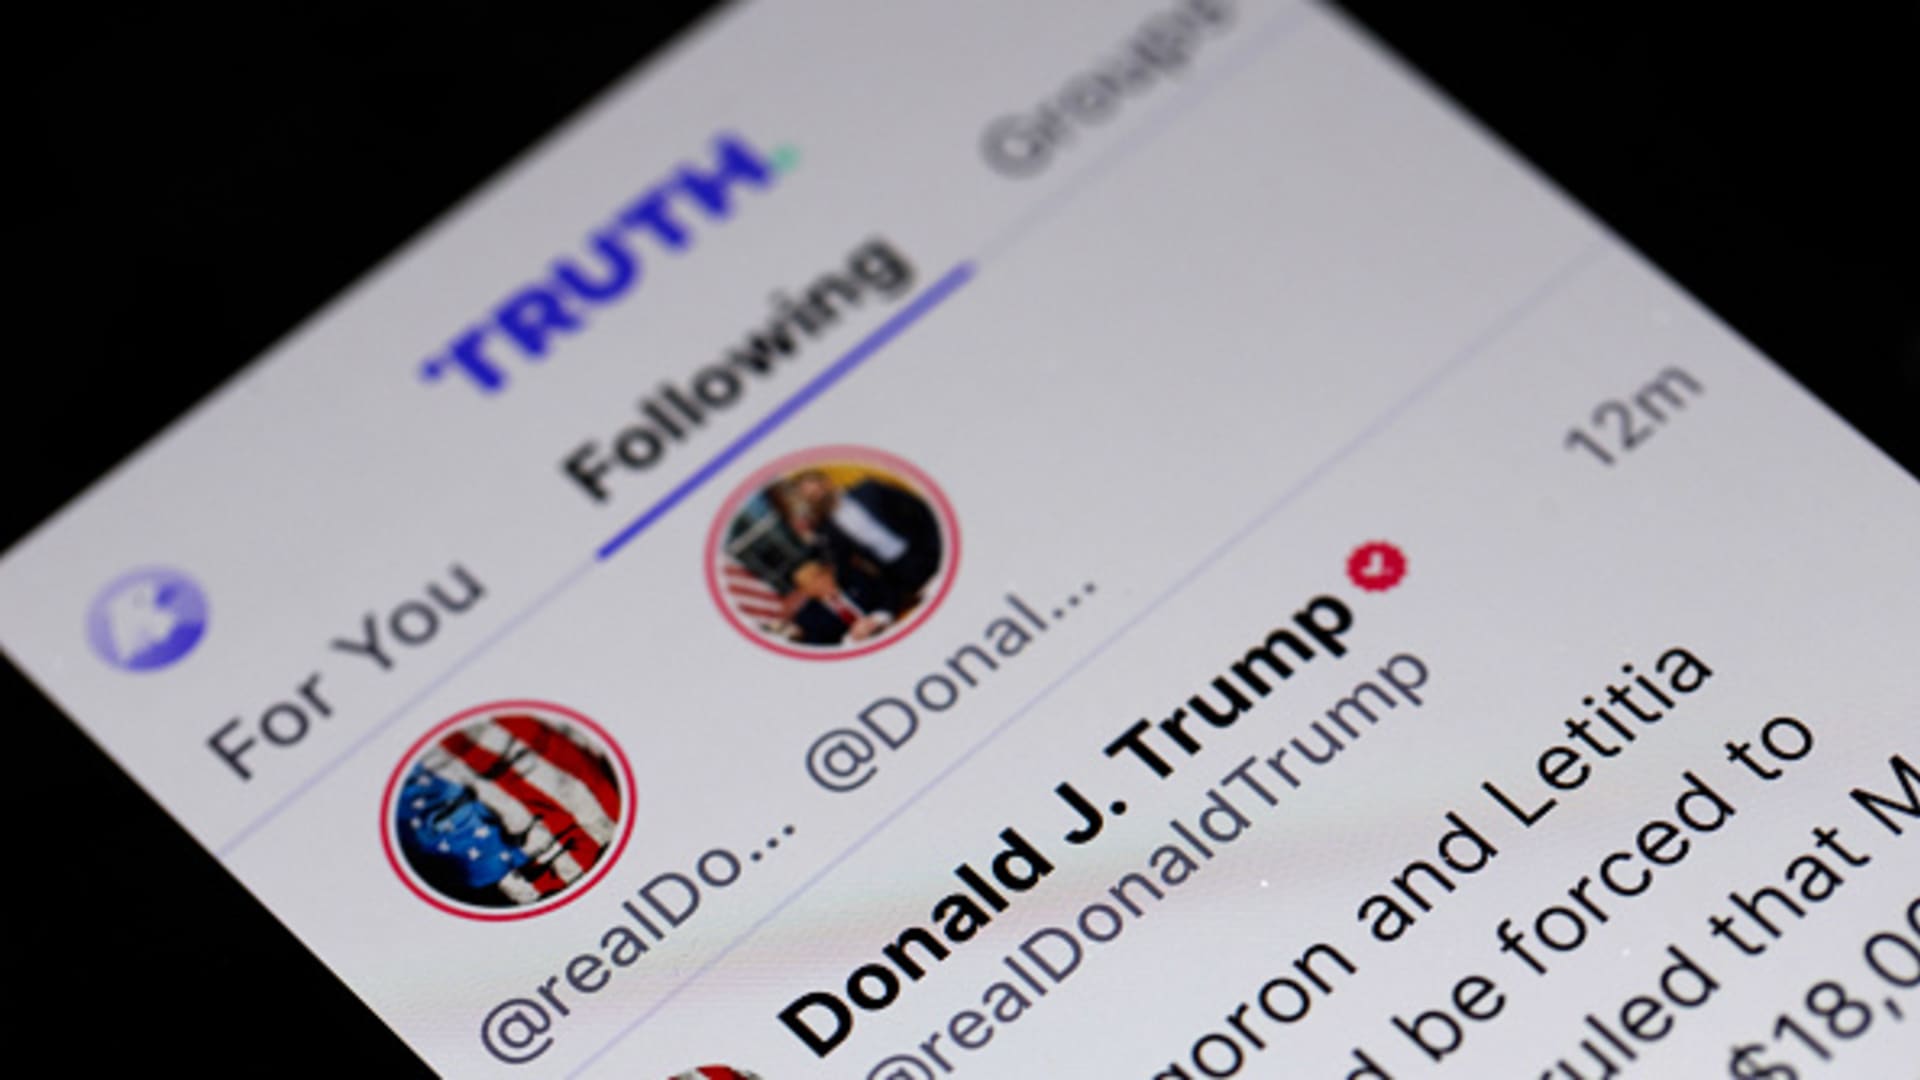 Former President Donald Trump's social media platform Truth Social is shown on a tablet in Chicago on March 25, 2024.